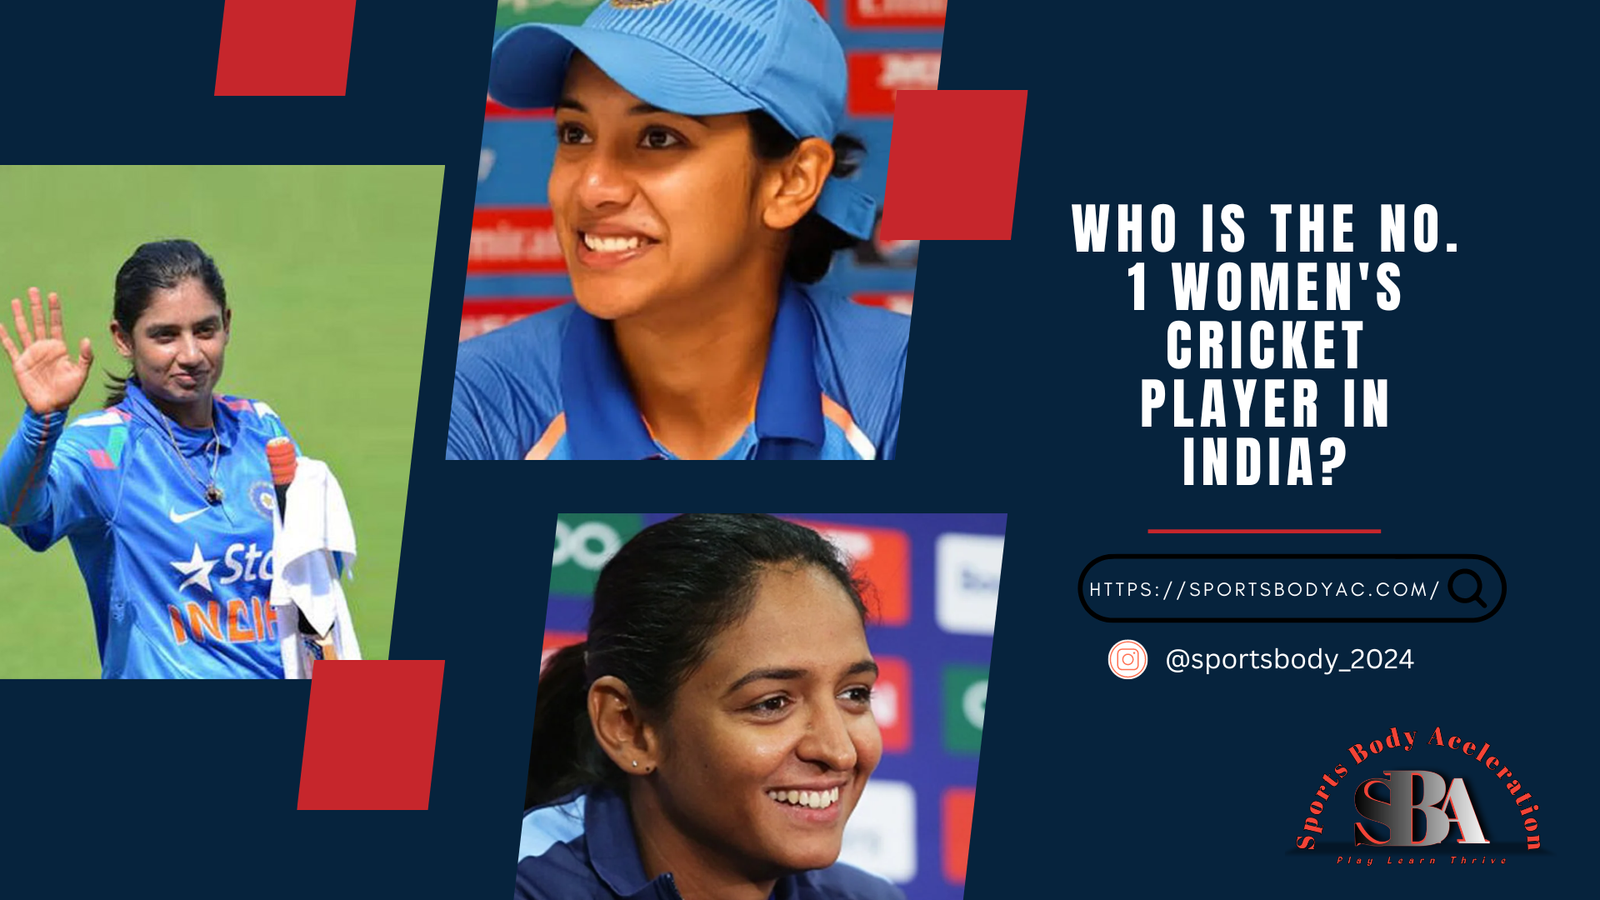 Who is the no. 1 women's cricket player in India?